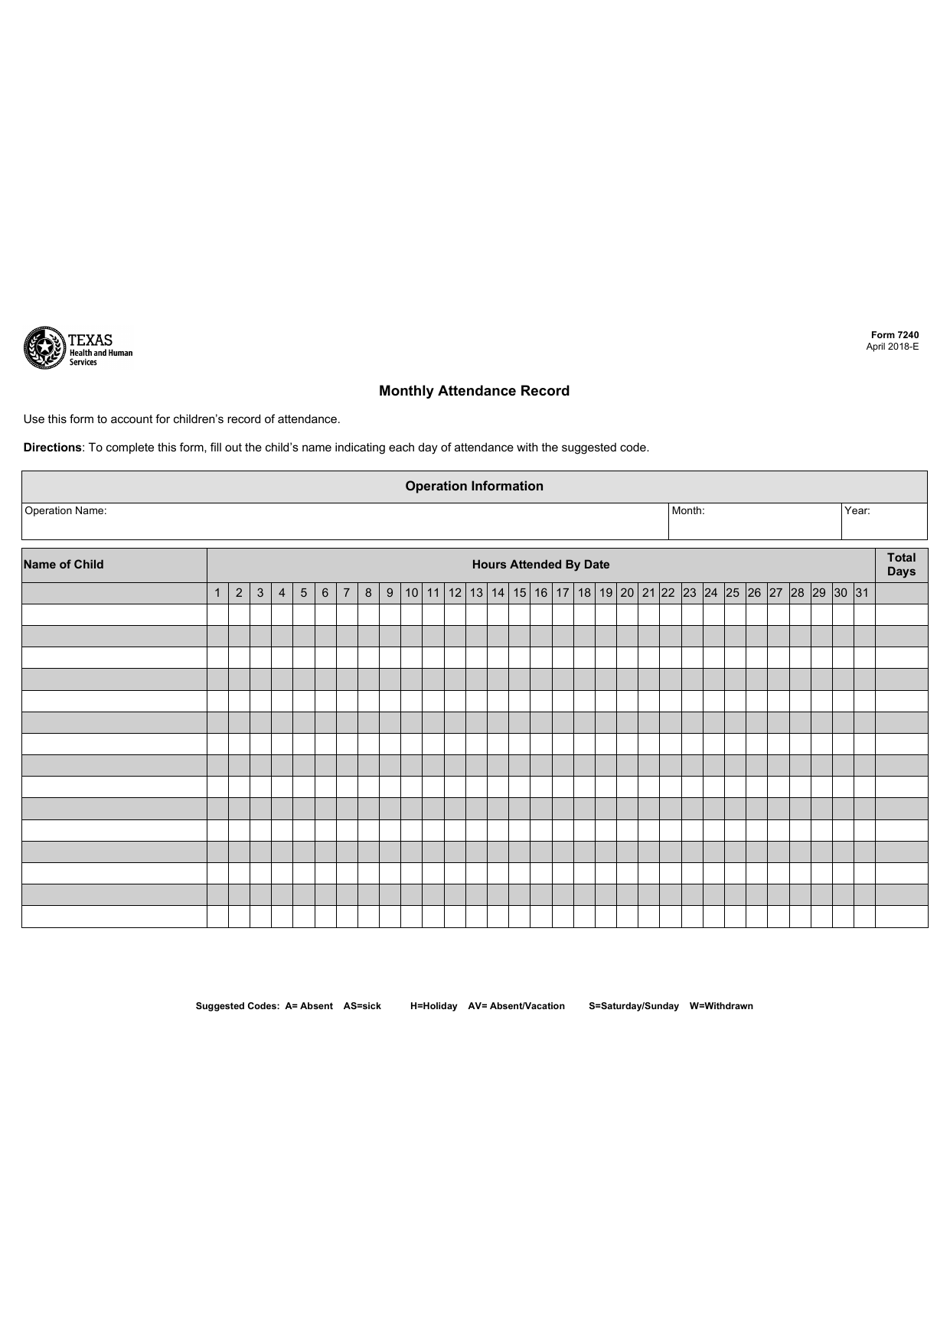 Form 7240 Monthly Attendance Record - Texas, Page 1